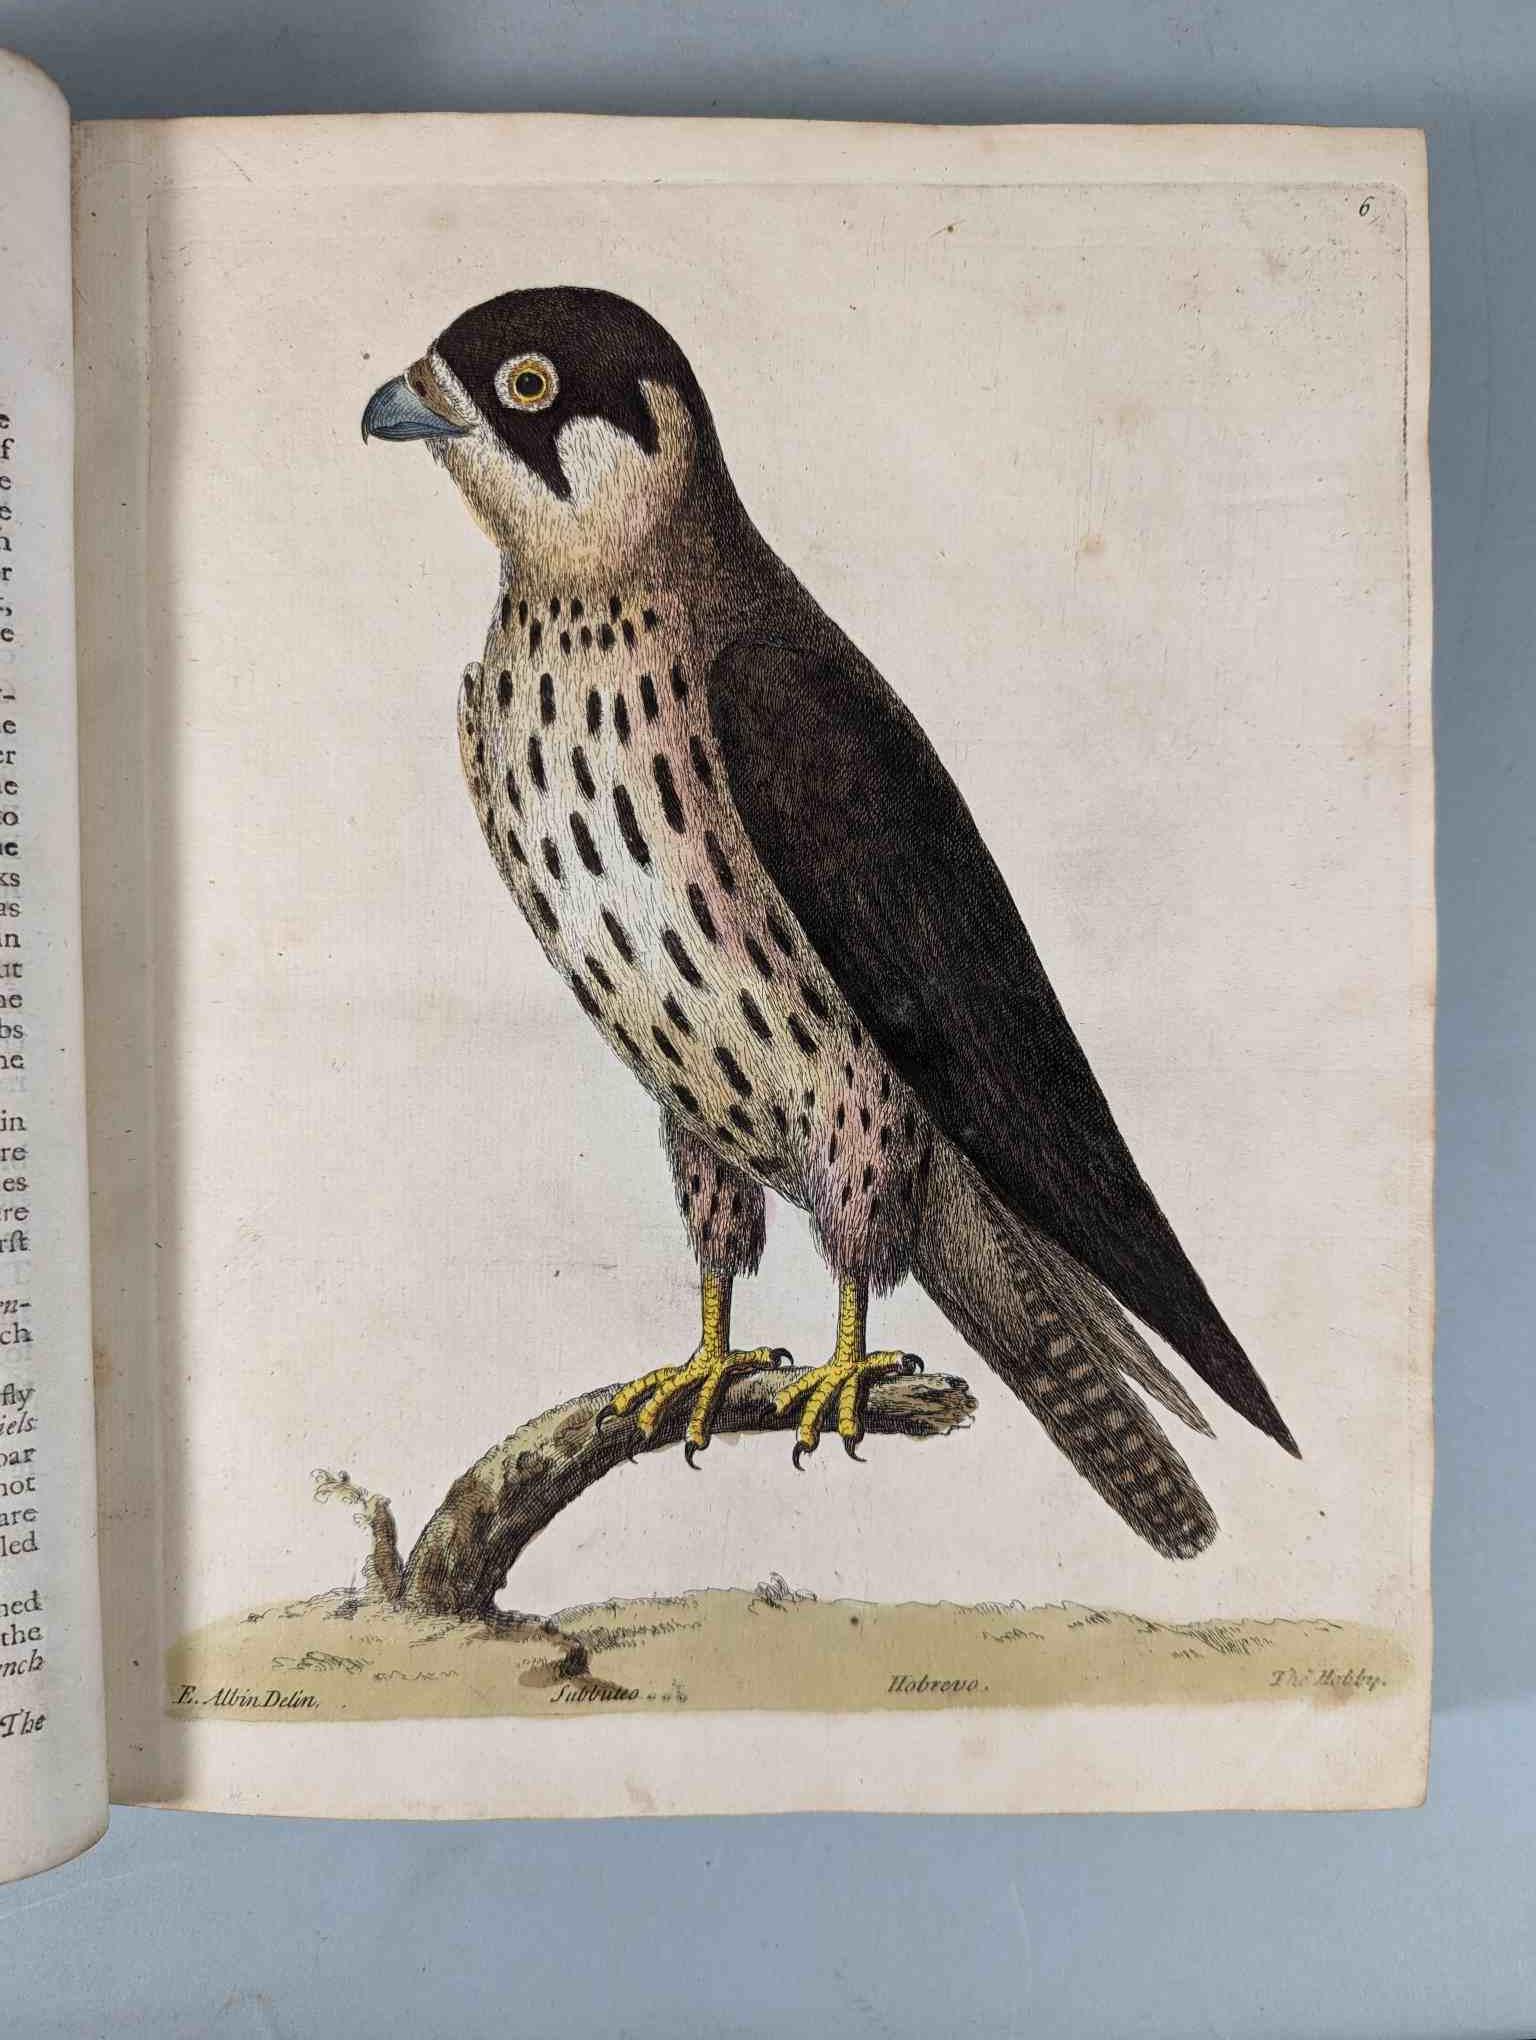 ALBIN, Eleazar. A Natural History of Birds, to which are added, Notes and Observations by W. - Image 5 of 208